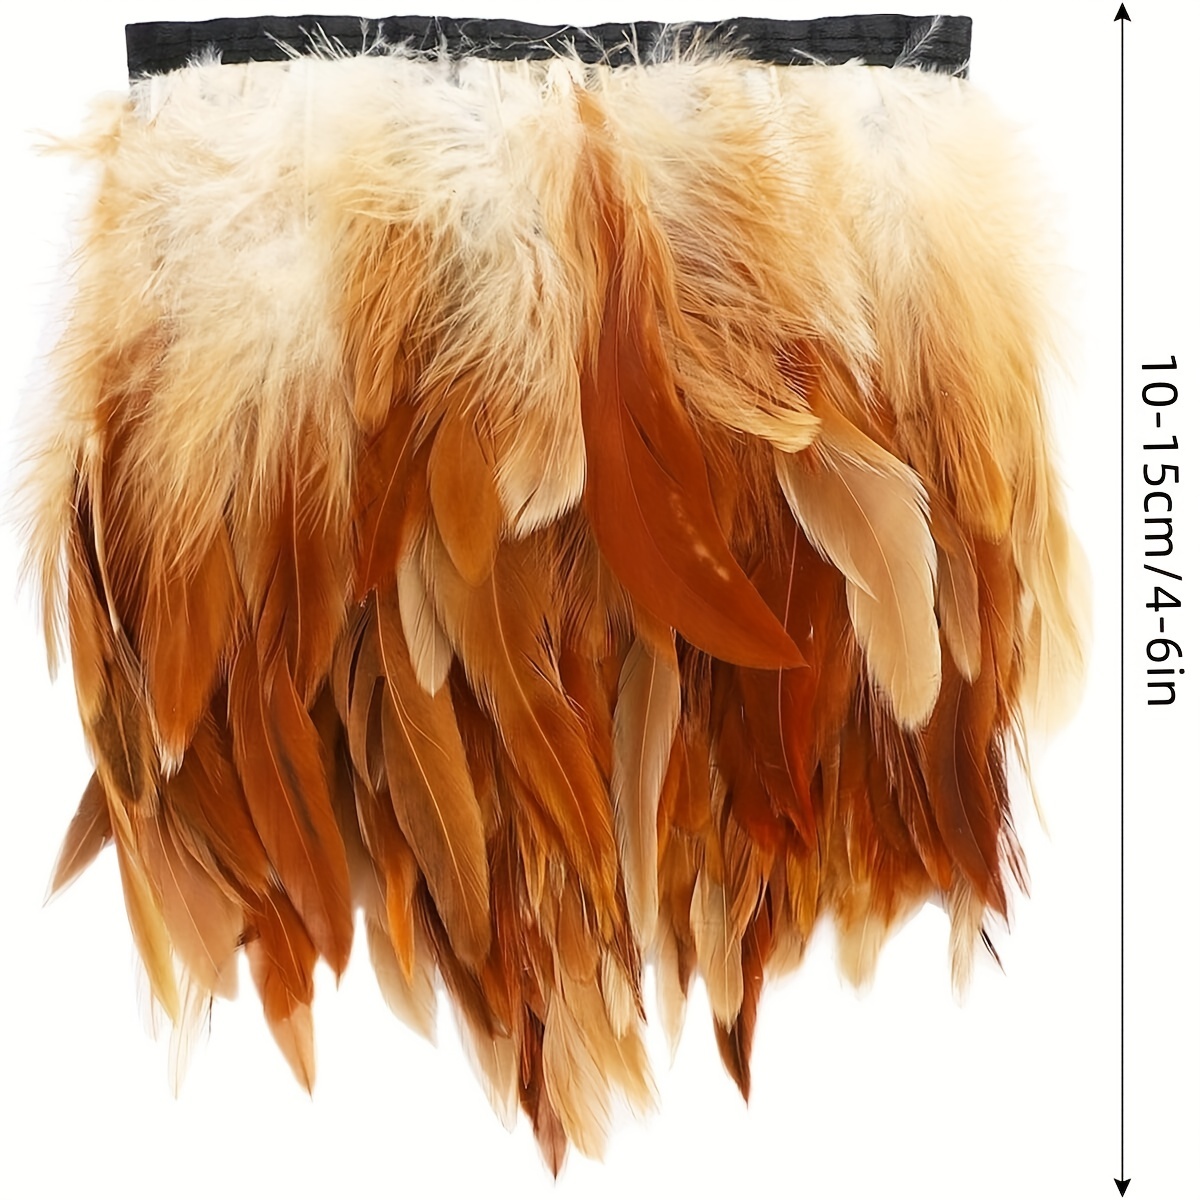 Goose Feathers and Ostrich Feather Fringe Trim 5-7 in Width Pack of 2  Yards (Black